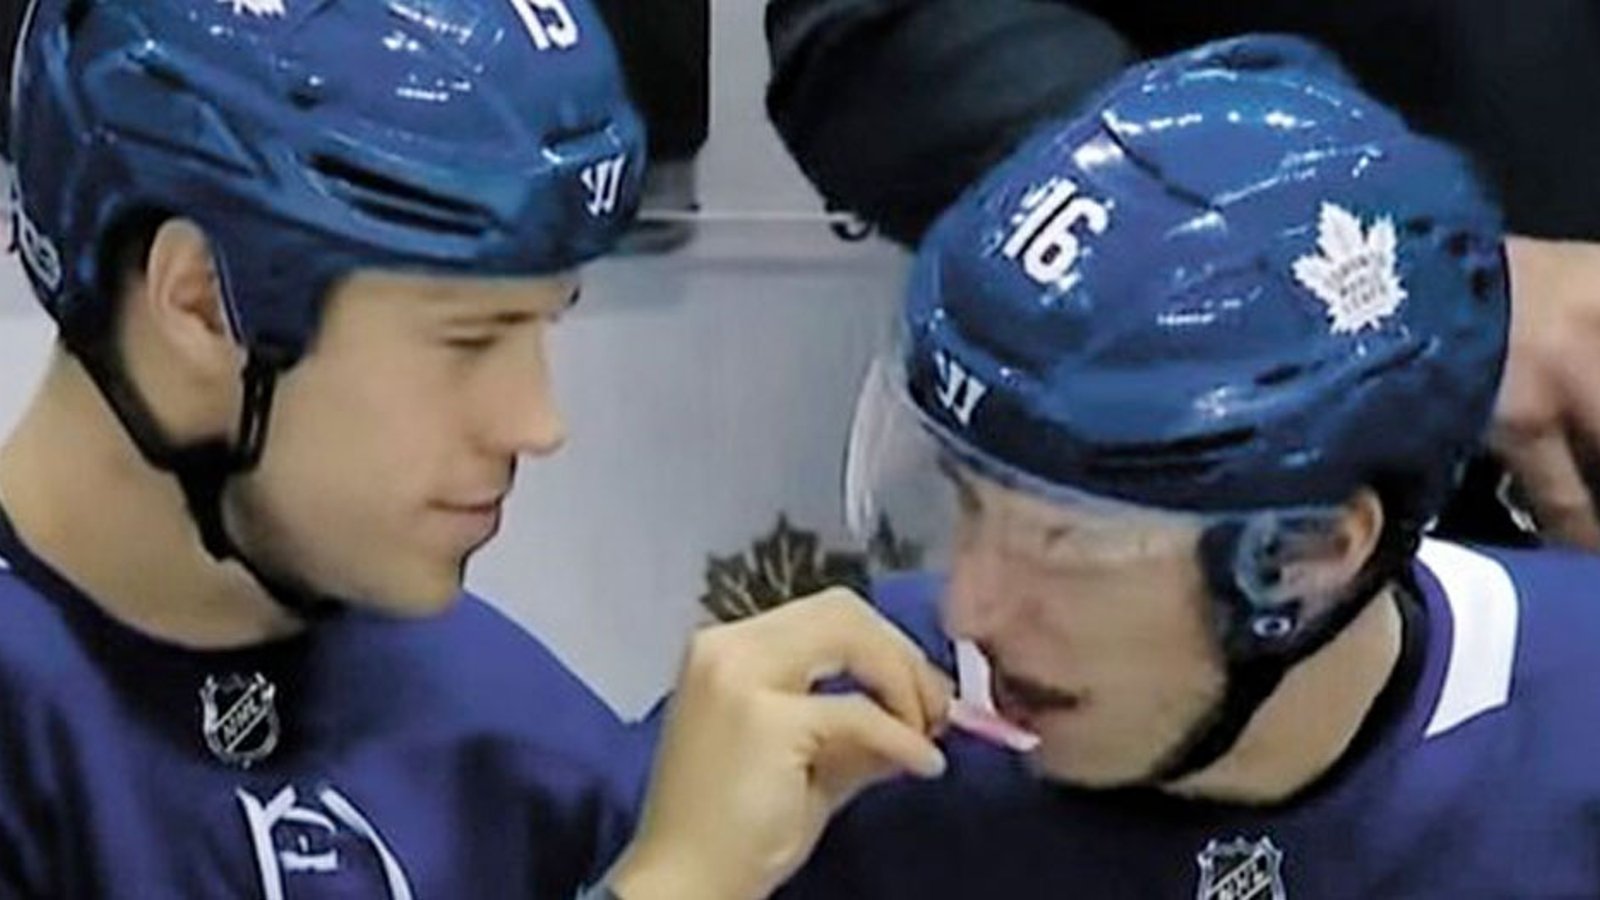 Cancel culture’s next target in hockey: smelling salts